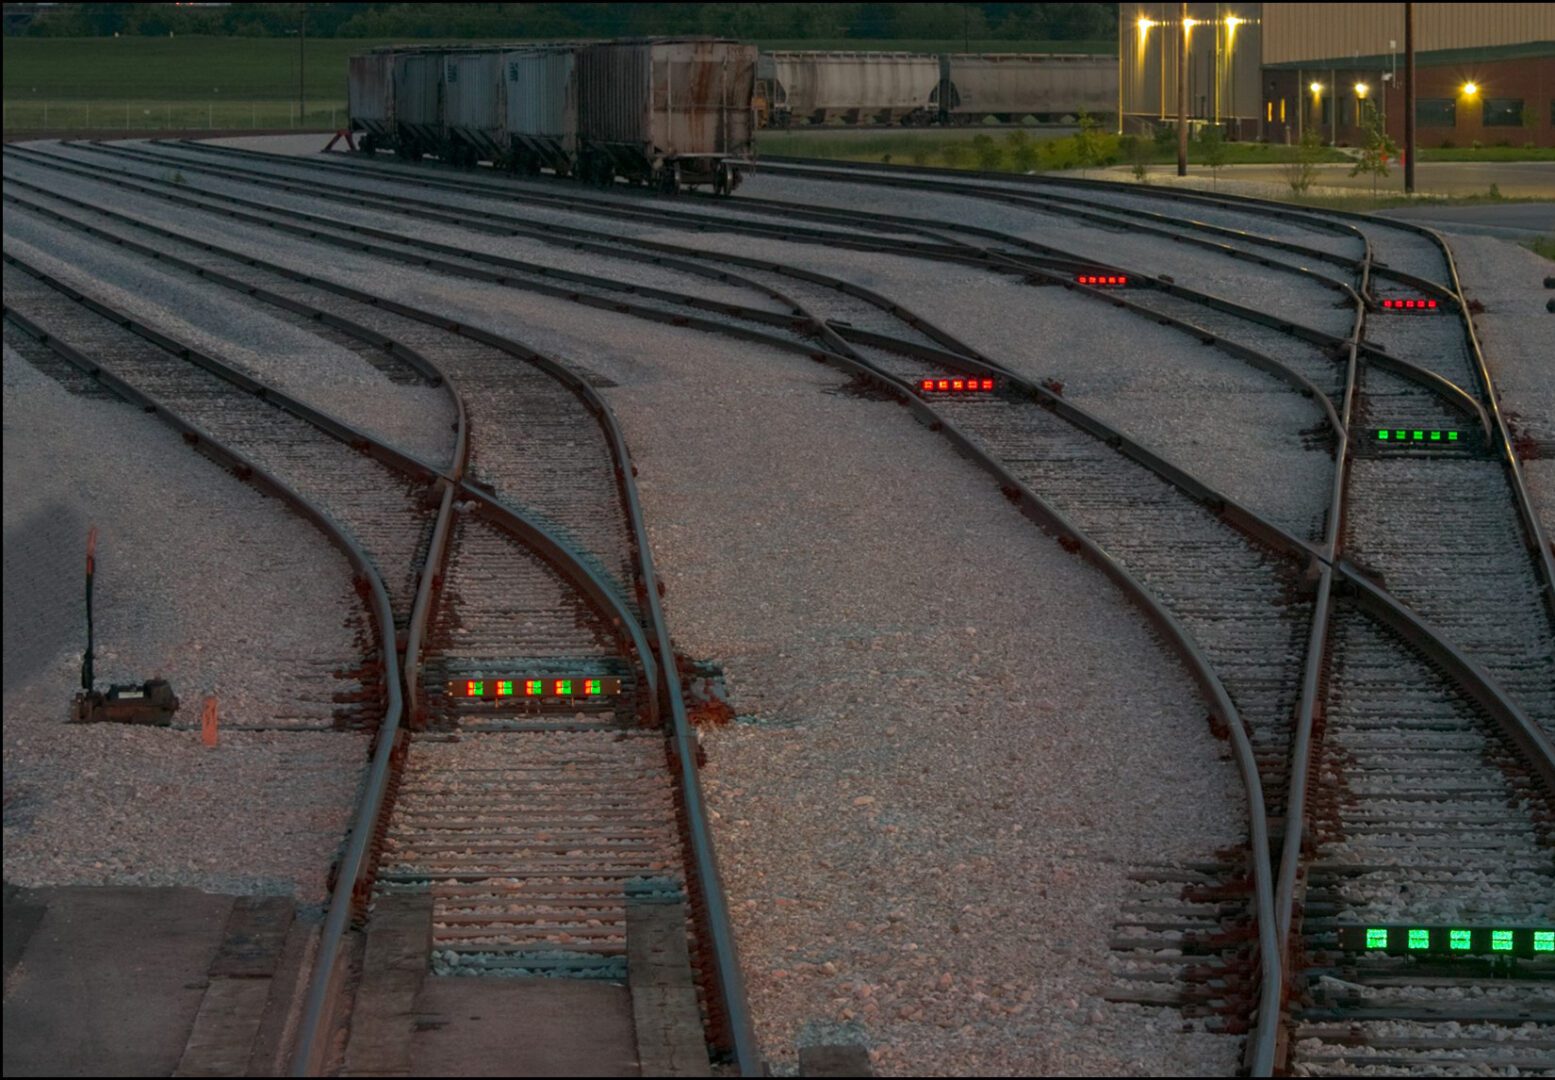 A train track with some lights on it